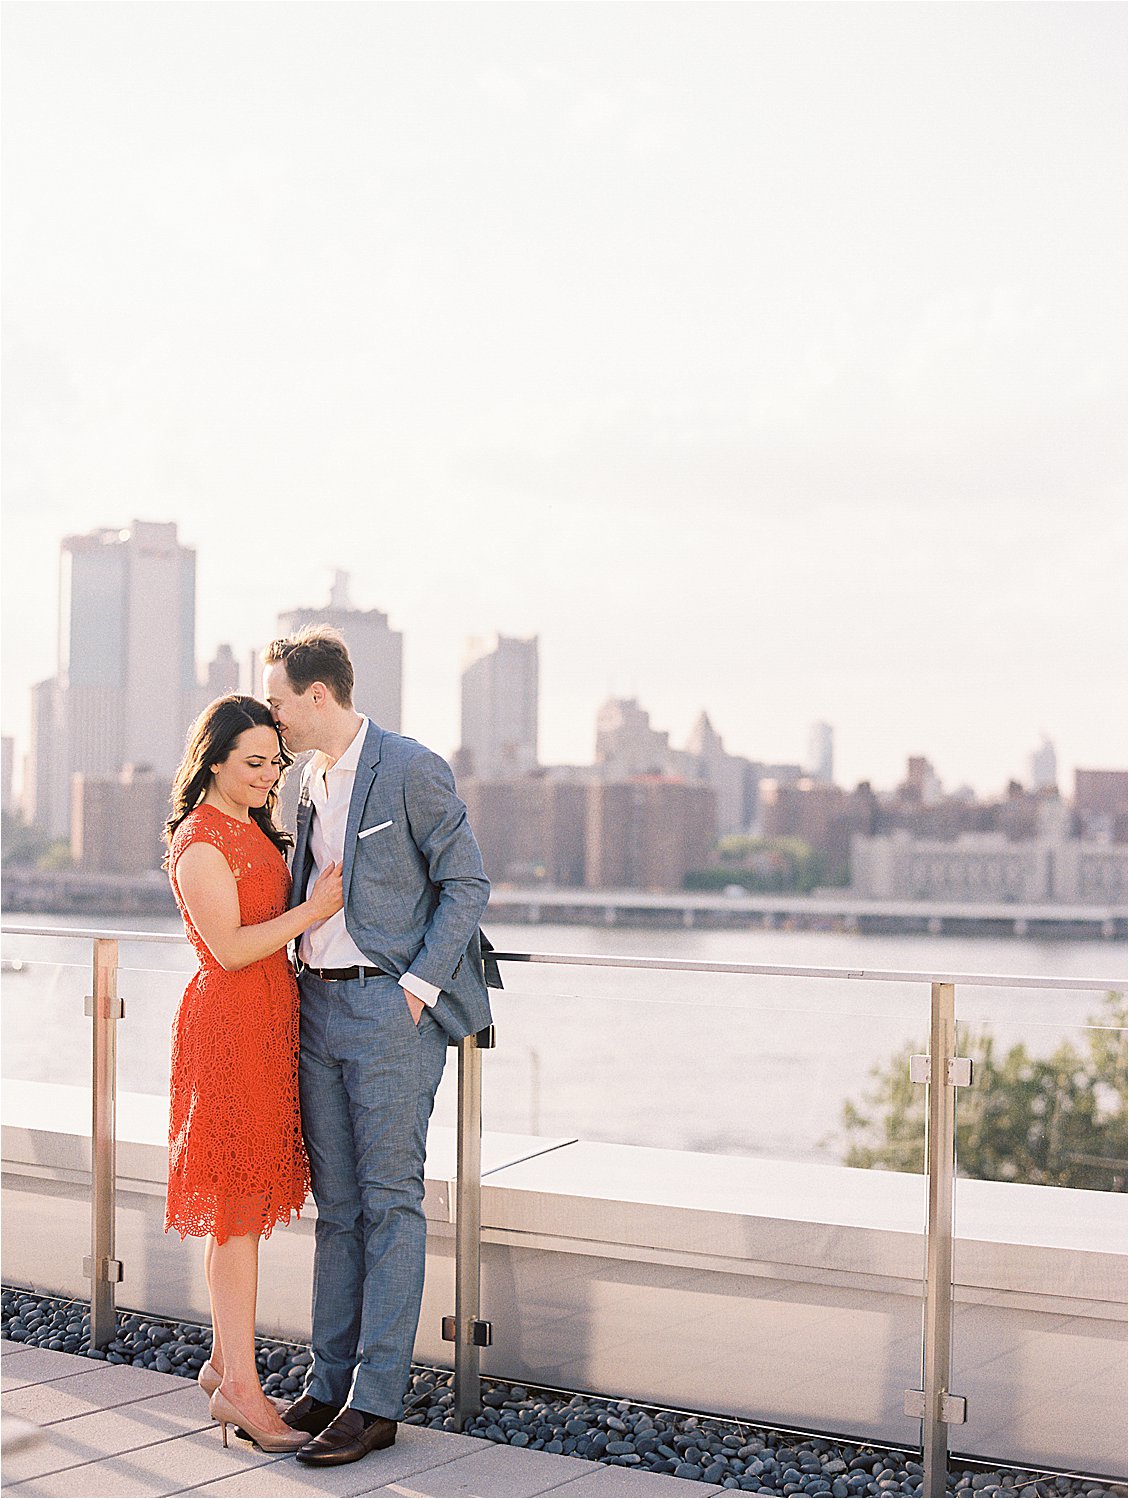 Planning Your Engagement Session with Florida and DC Film Wedding and Engagement Photographer, Renee Hollingshead. Pick a meaningful location, like the rooftop of your building. DUMBO Brooklyn New York Engagement